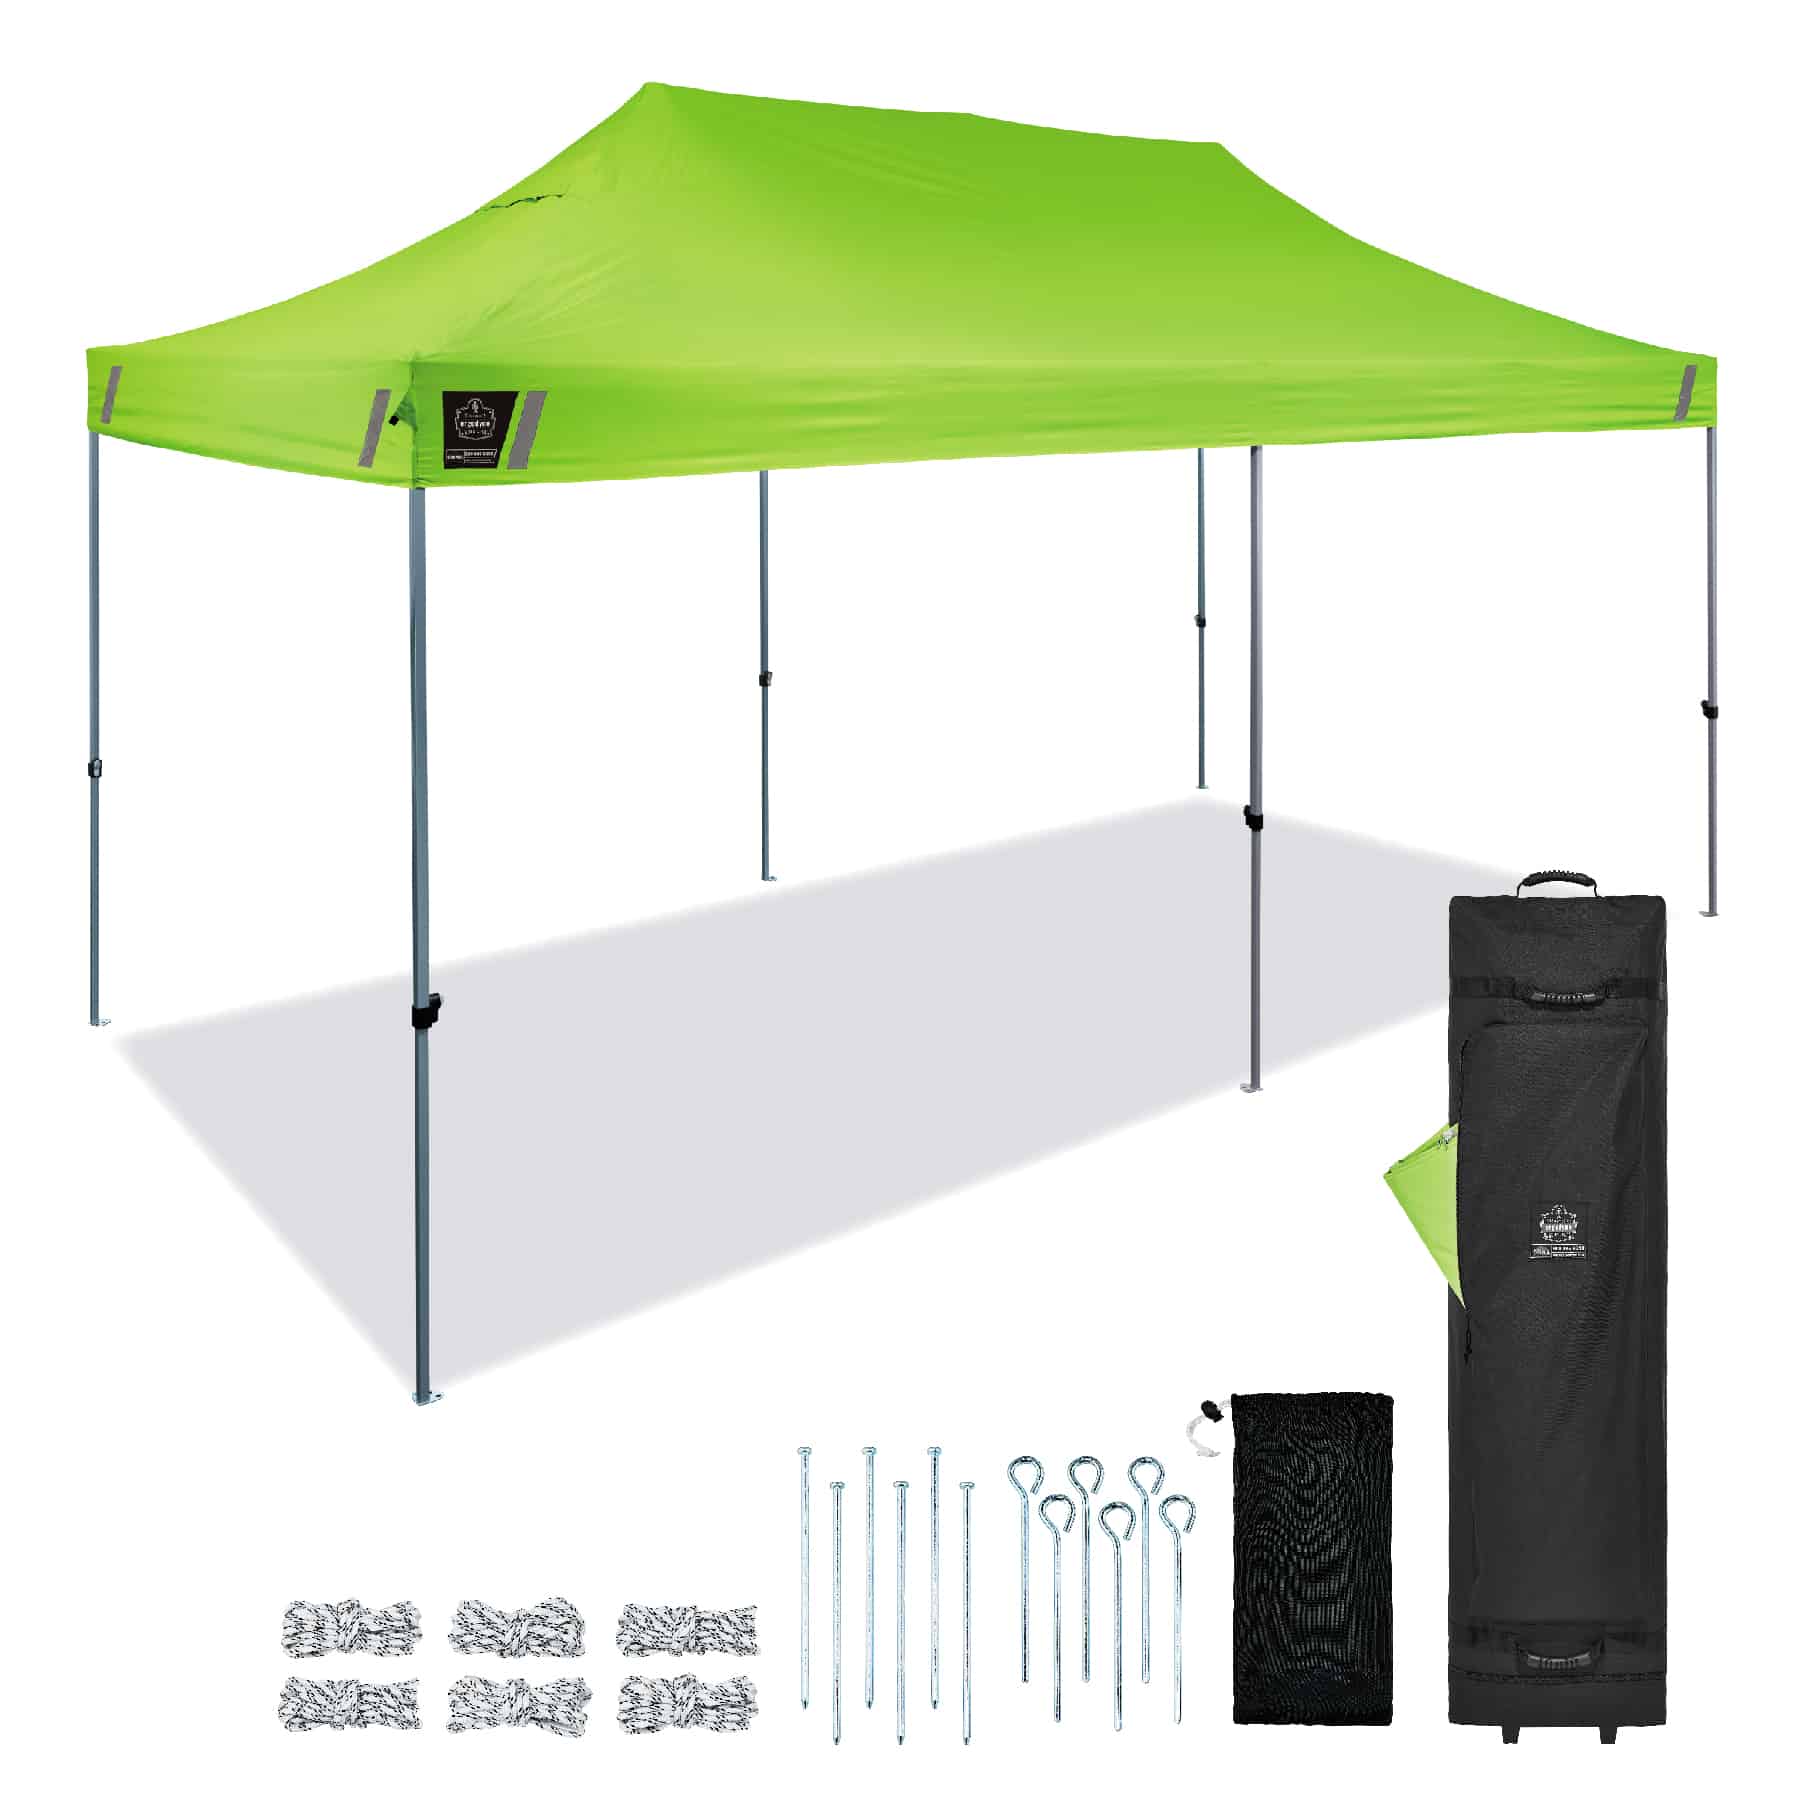 SHAX® 6015 Heavy-Duty Pop-Up Tent - 10ft x 20ft / 3m x 6m-eSafety Supplies, Inc